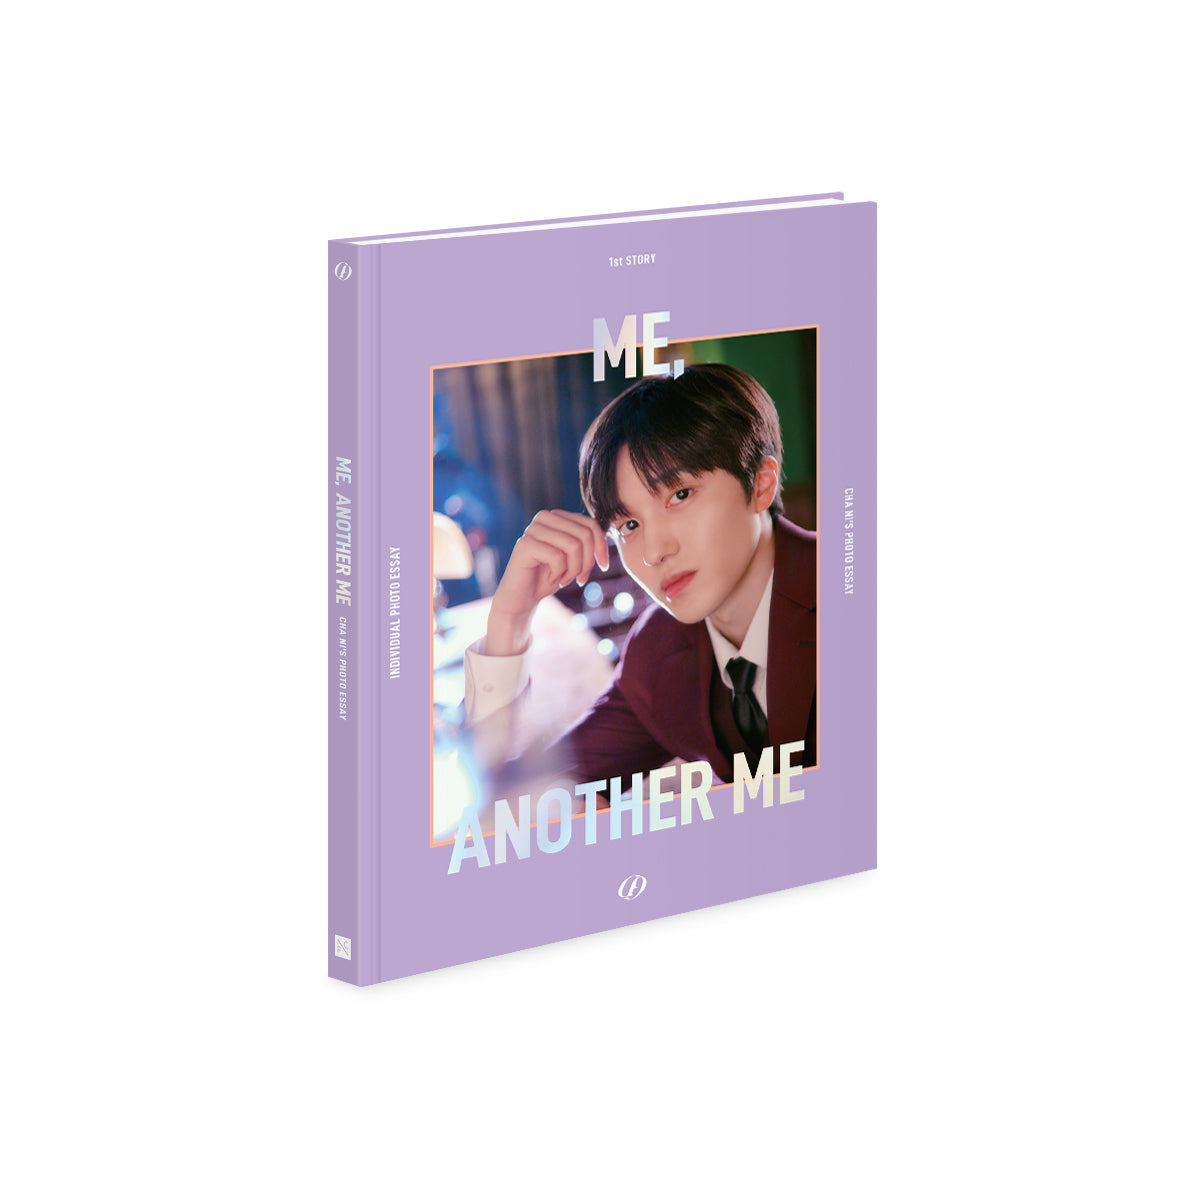 SF9 HWI YOUNG & CHA NI’S PHOTO ESSAY 'ME, ANOTHER ME' CHA NI VERSION COVER